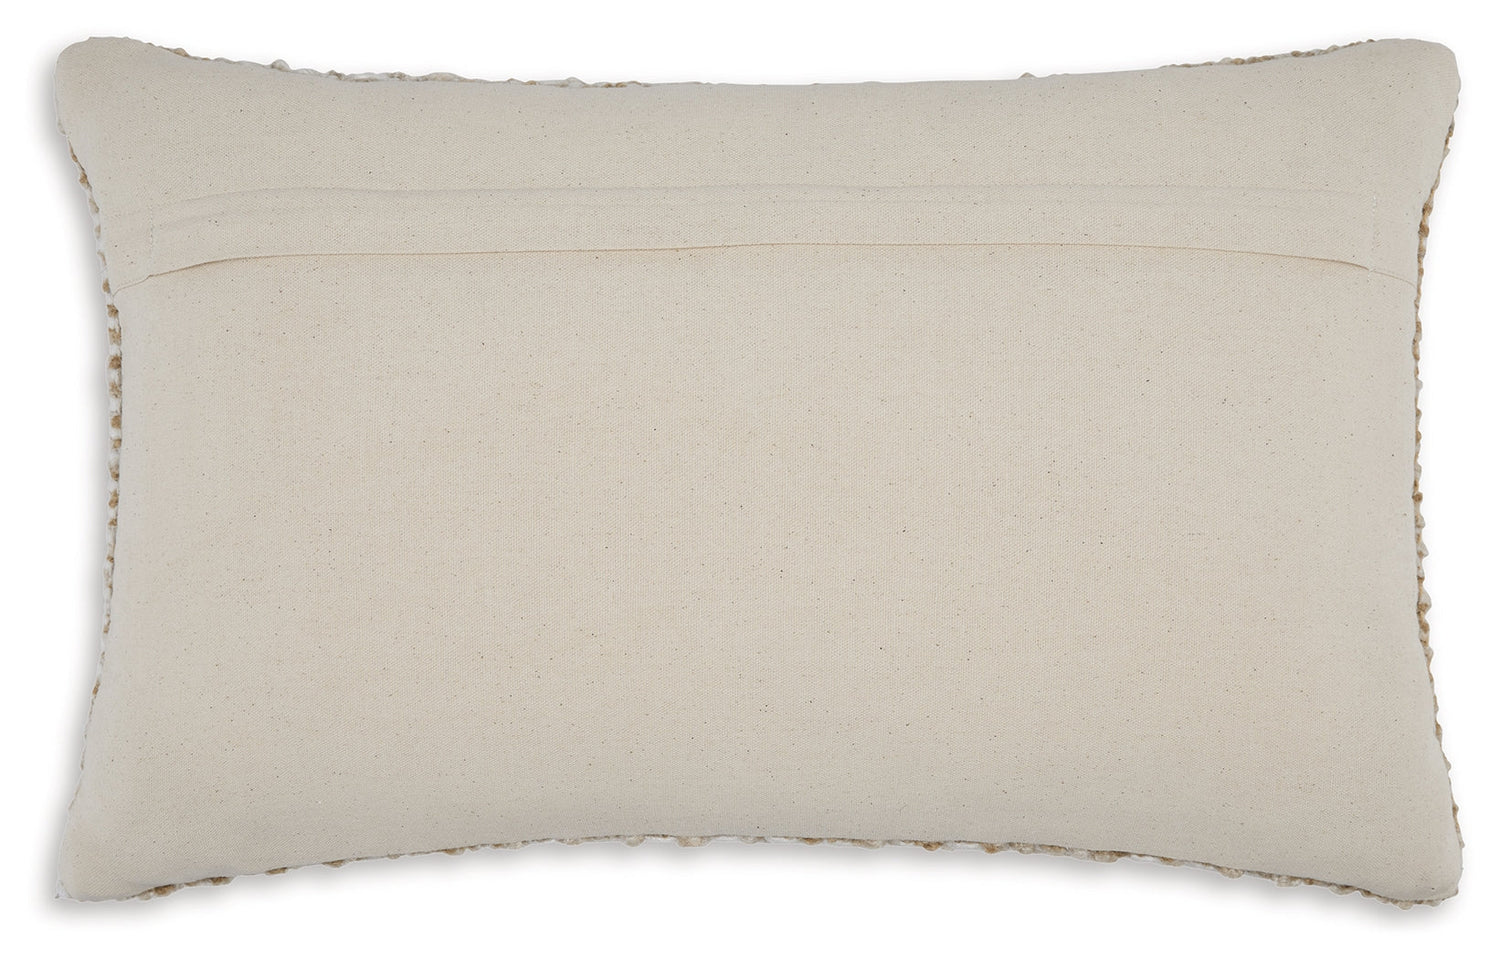 Hathby Tan/White Pillow (Set of 4) - A1001048 - Bien Home Furniture &amp; Electronics